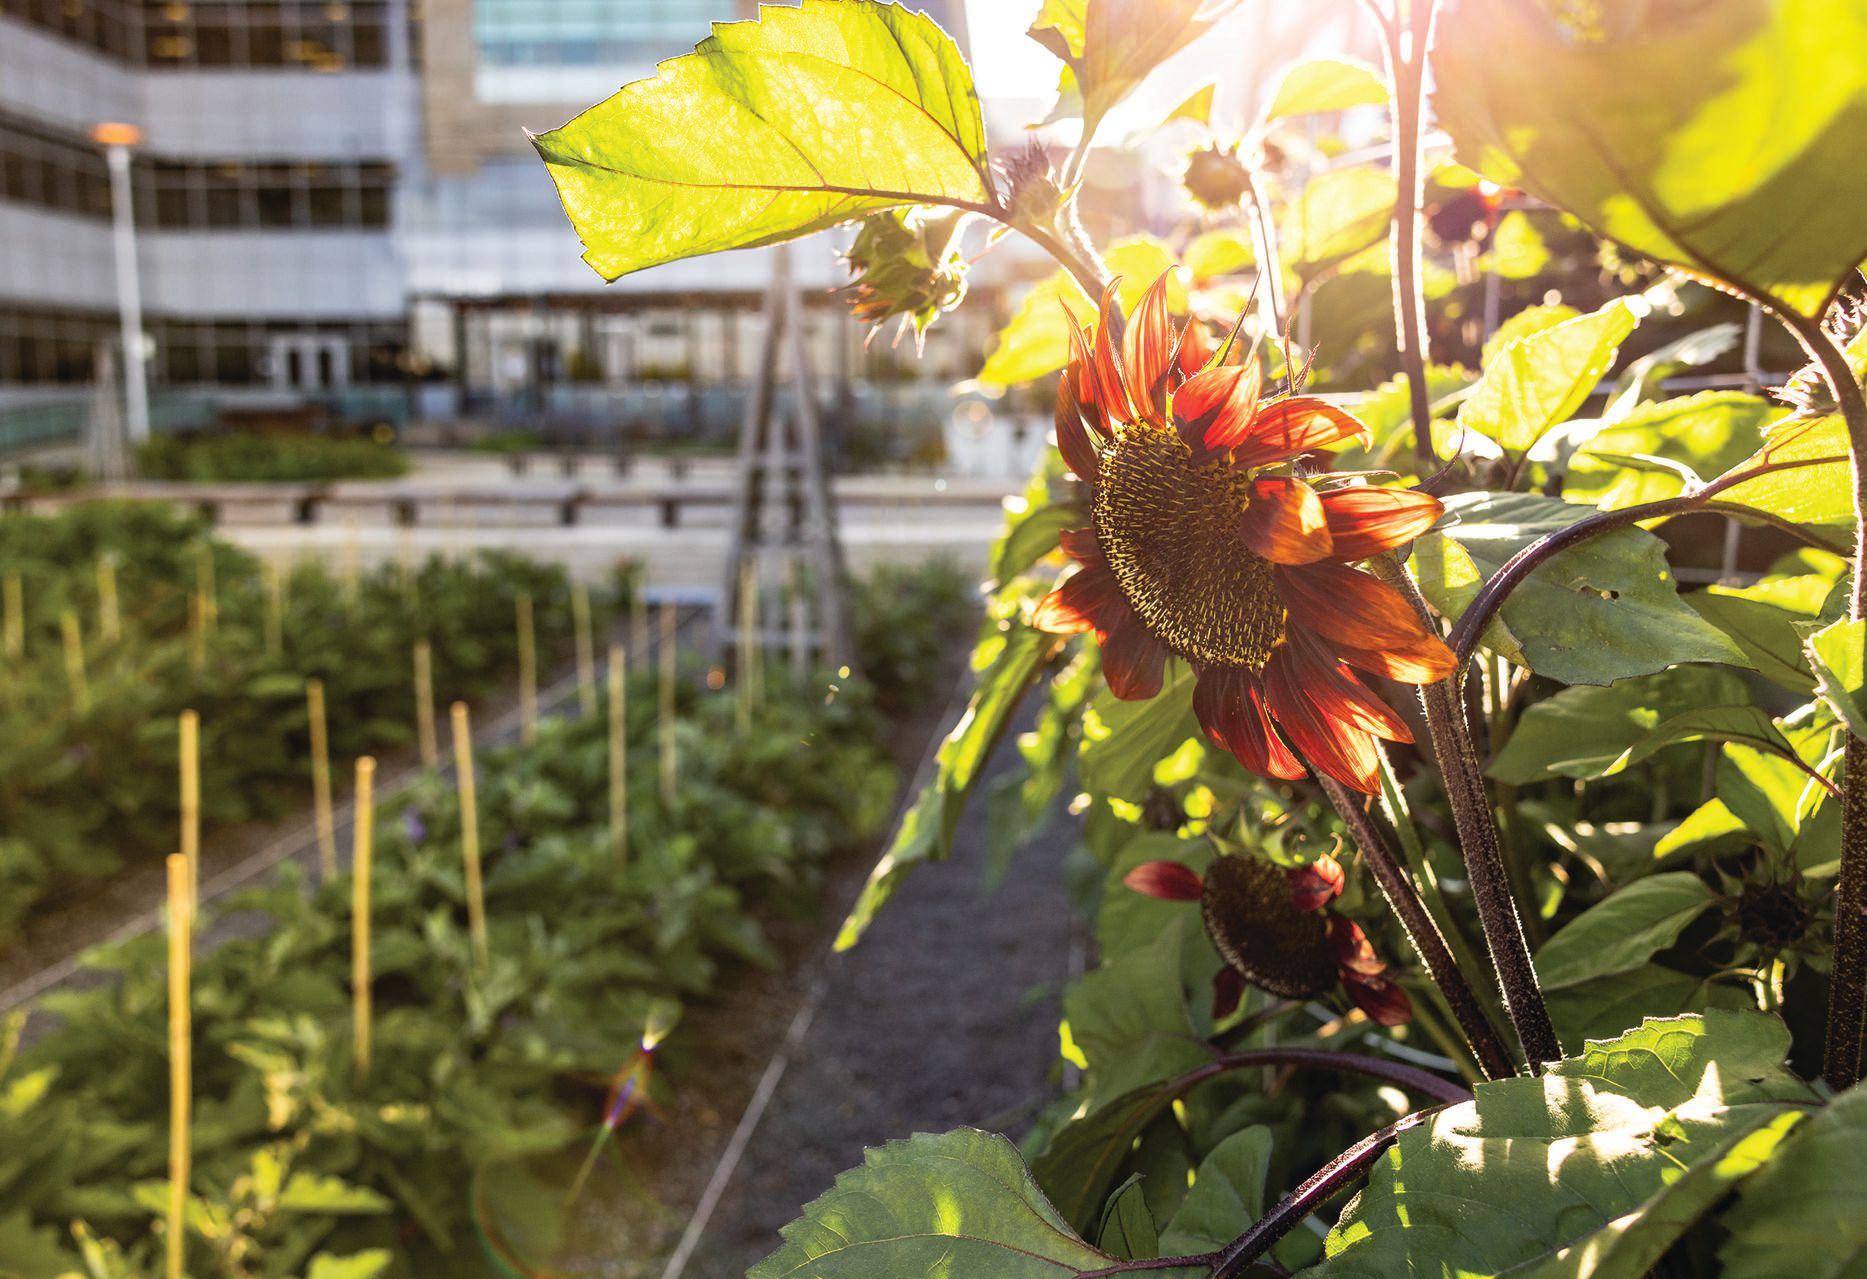 Sunflowers are also part of the Stem Kitchen garden, another option for backyard curations. PHOTO BY ERIN KUNKEL